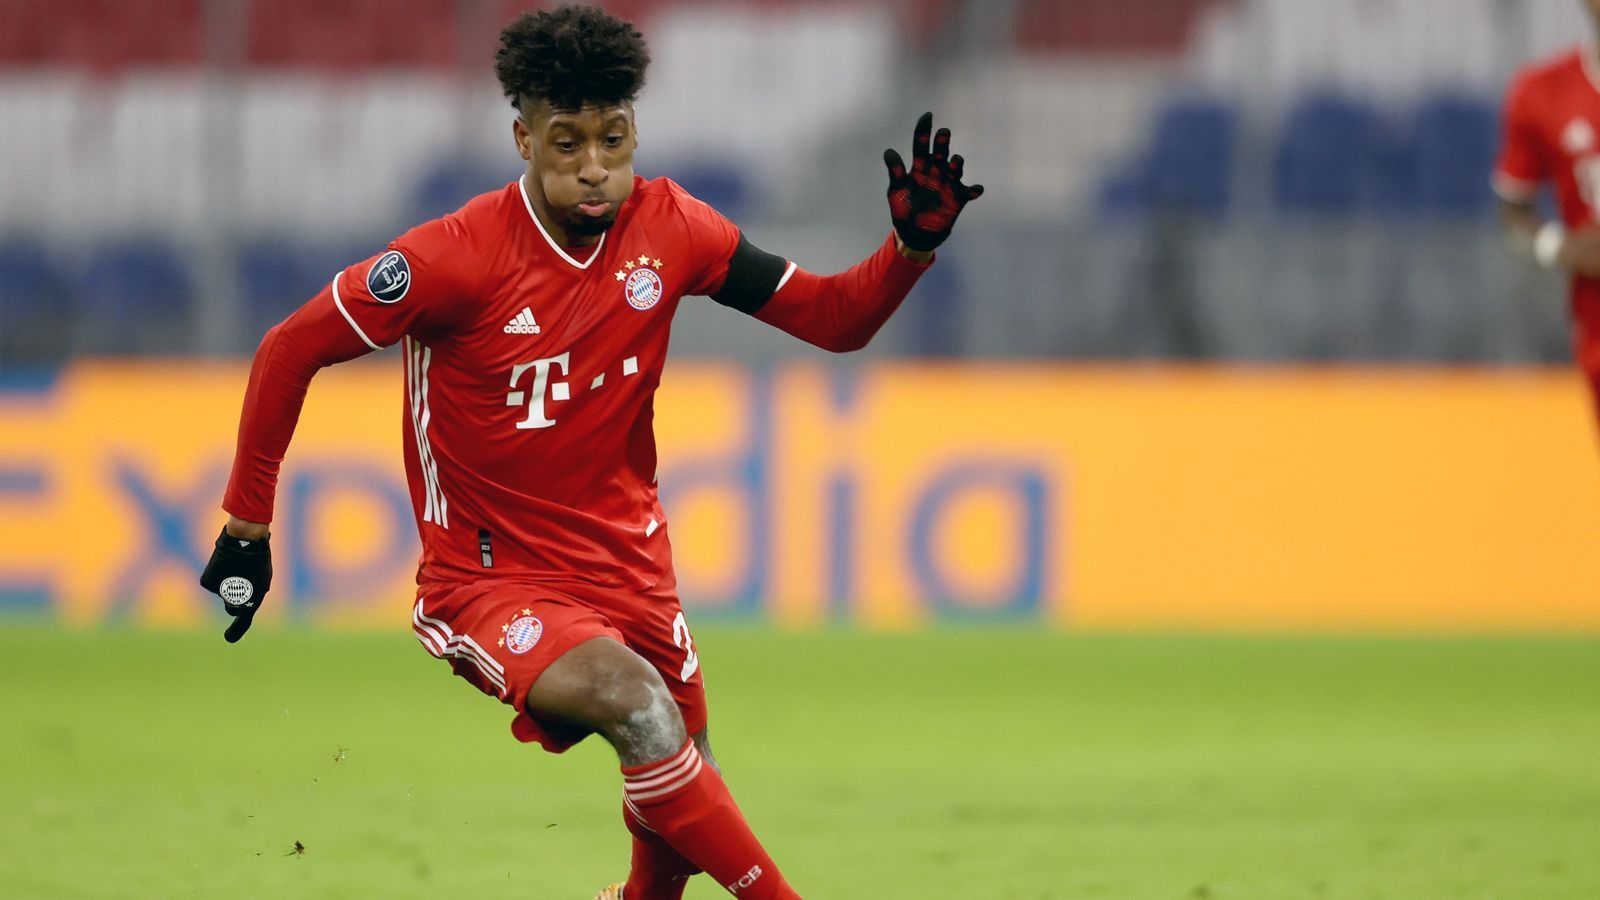 
                <strong>Kingsley Coman (FC Bayern München)</strong><br>
                Position: Angriff - Alter: 24 Jahre
              